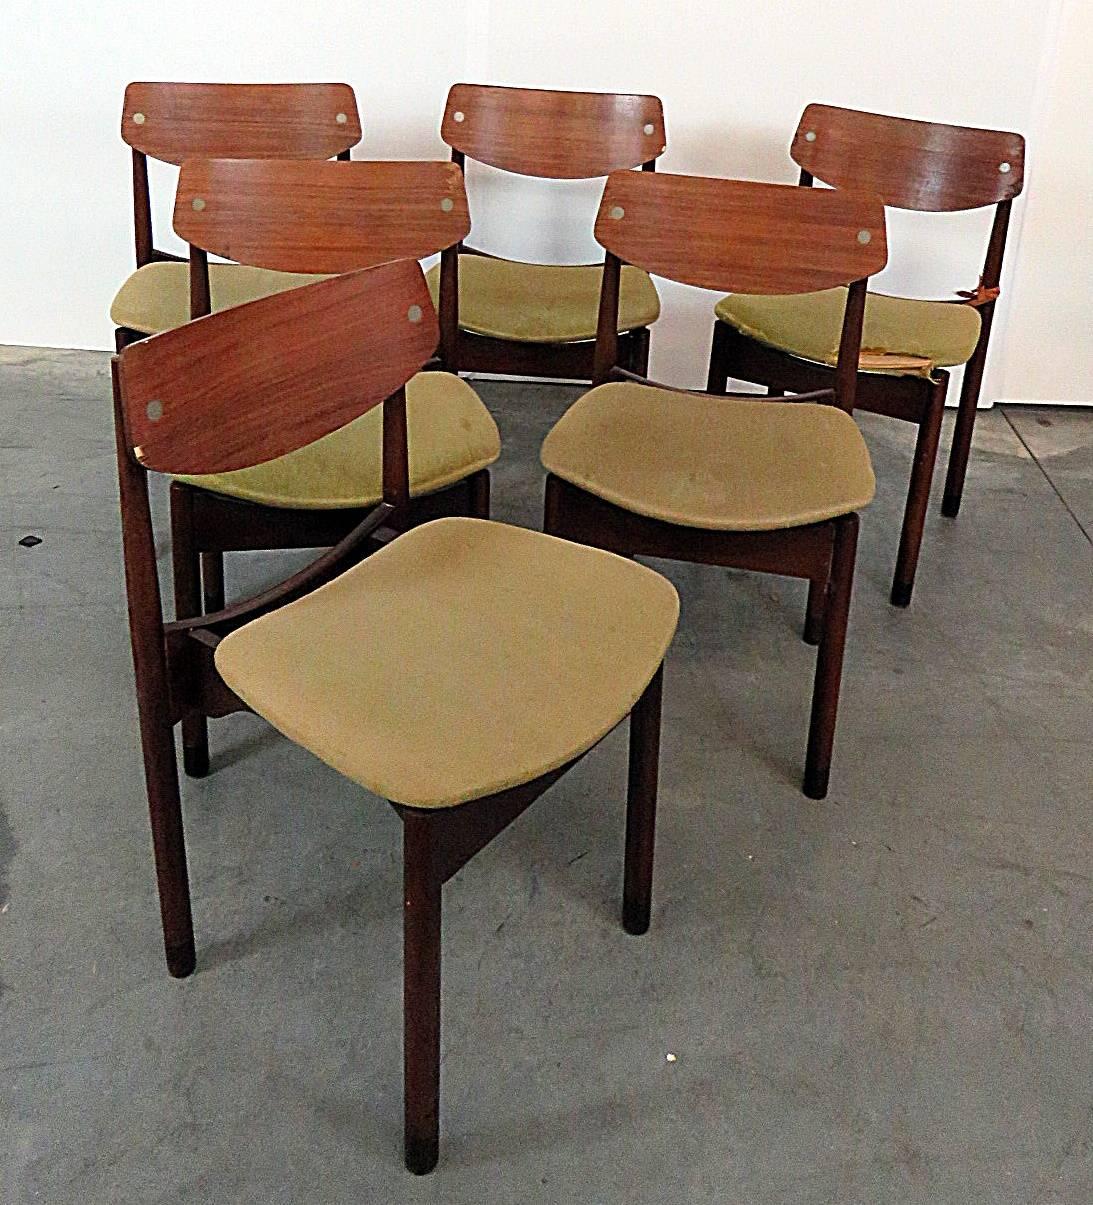 Six Danish style dining side chairs with walnut frames. Measures: 15